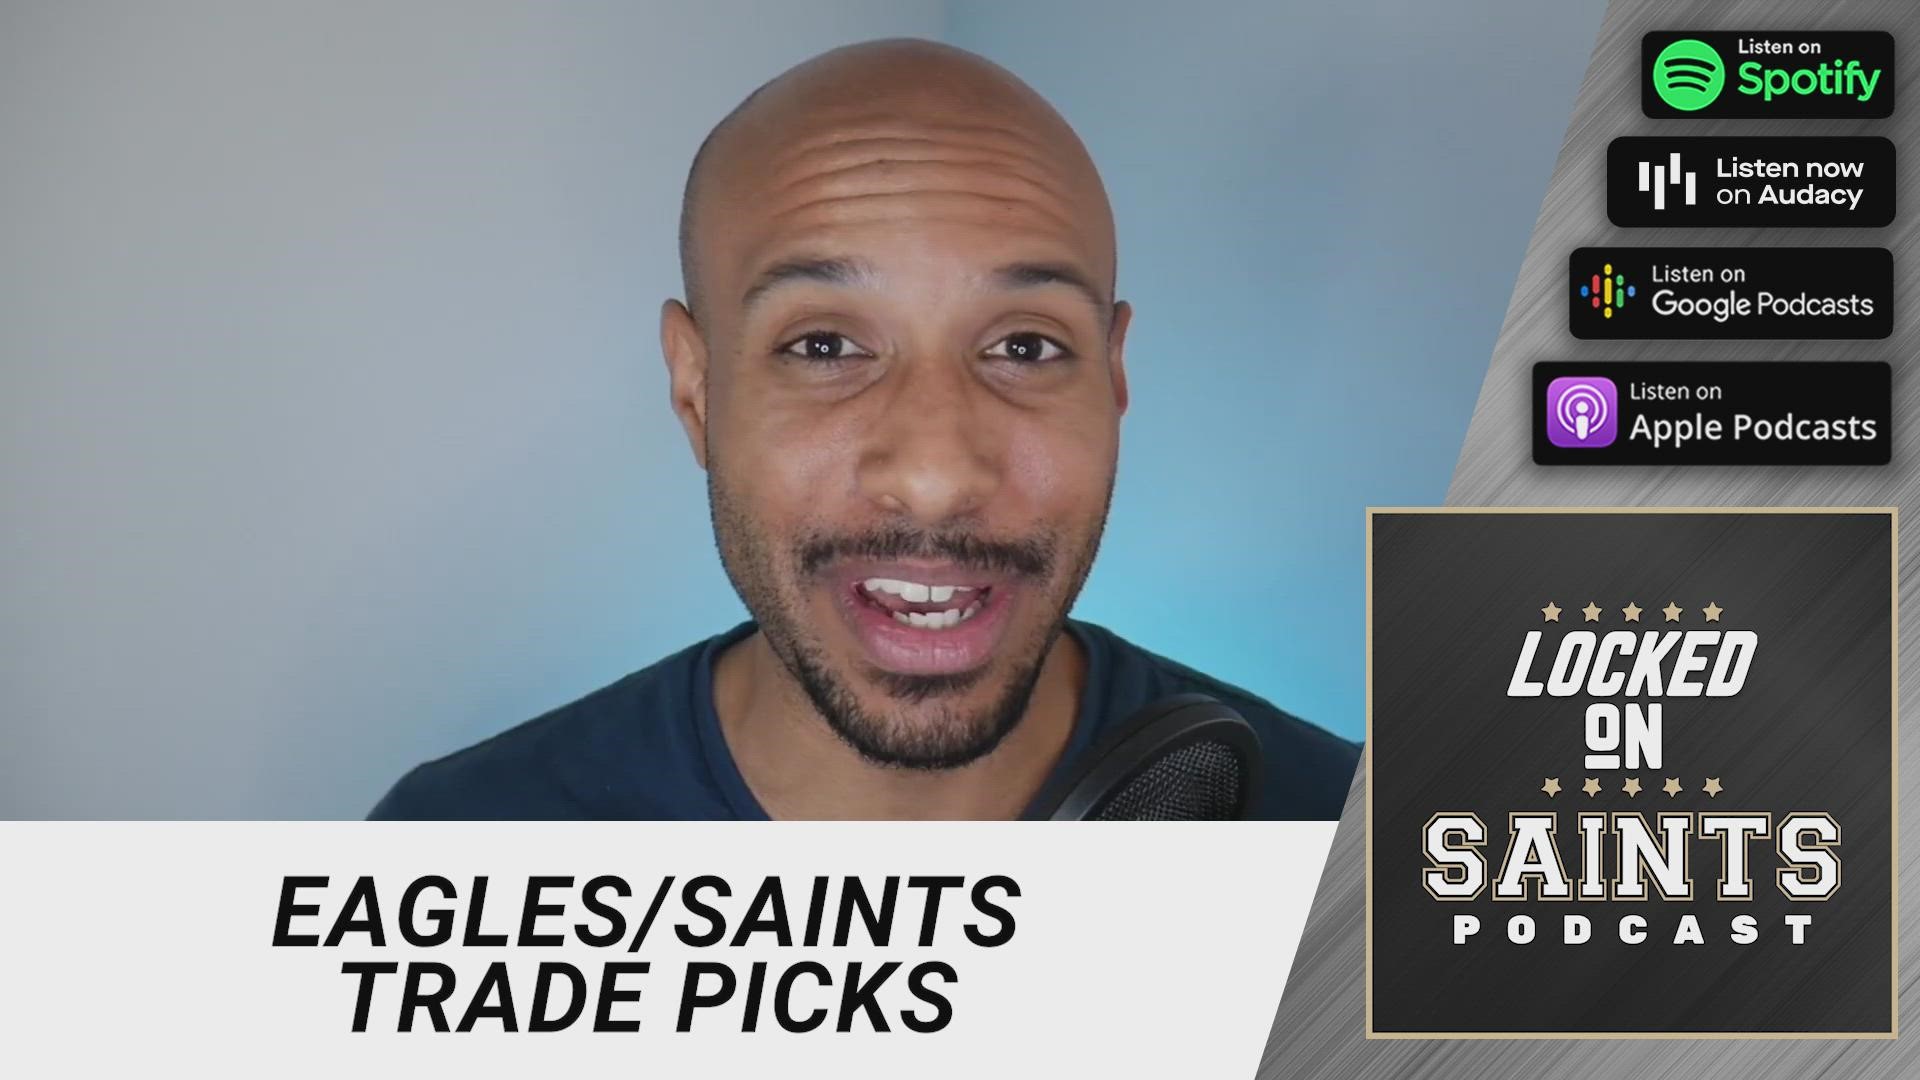 Why, after swap with Saints, Eagles may not be done trading